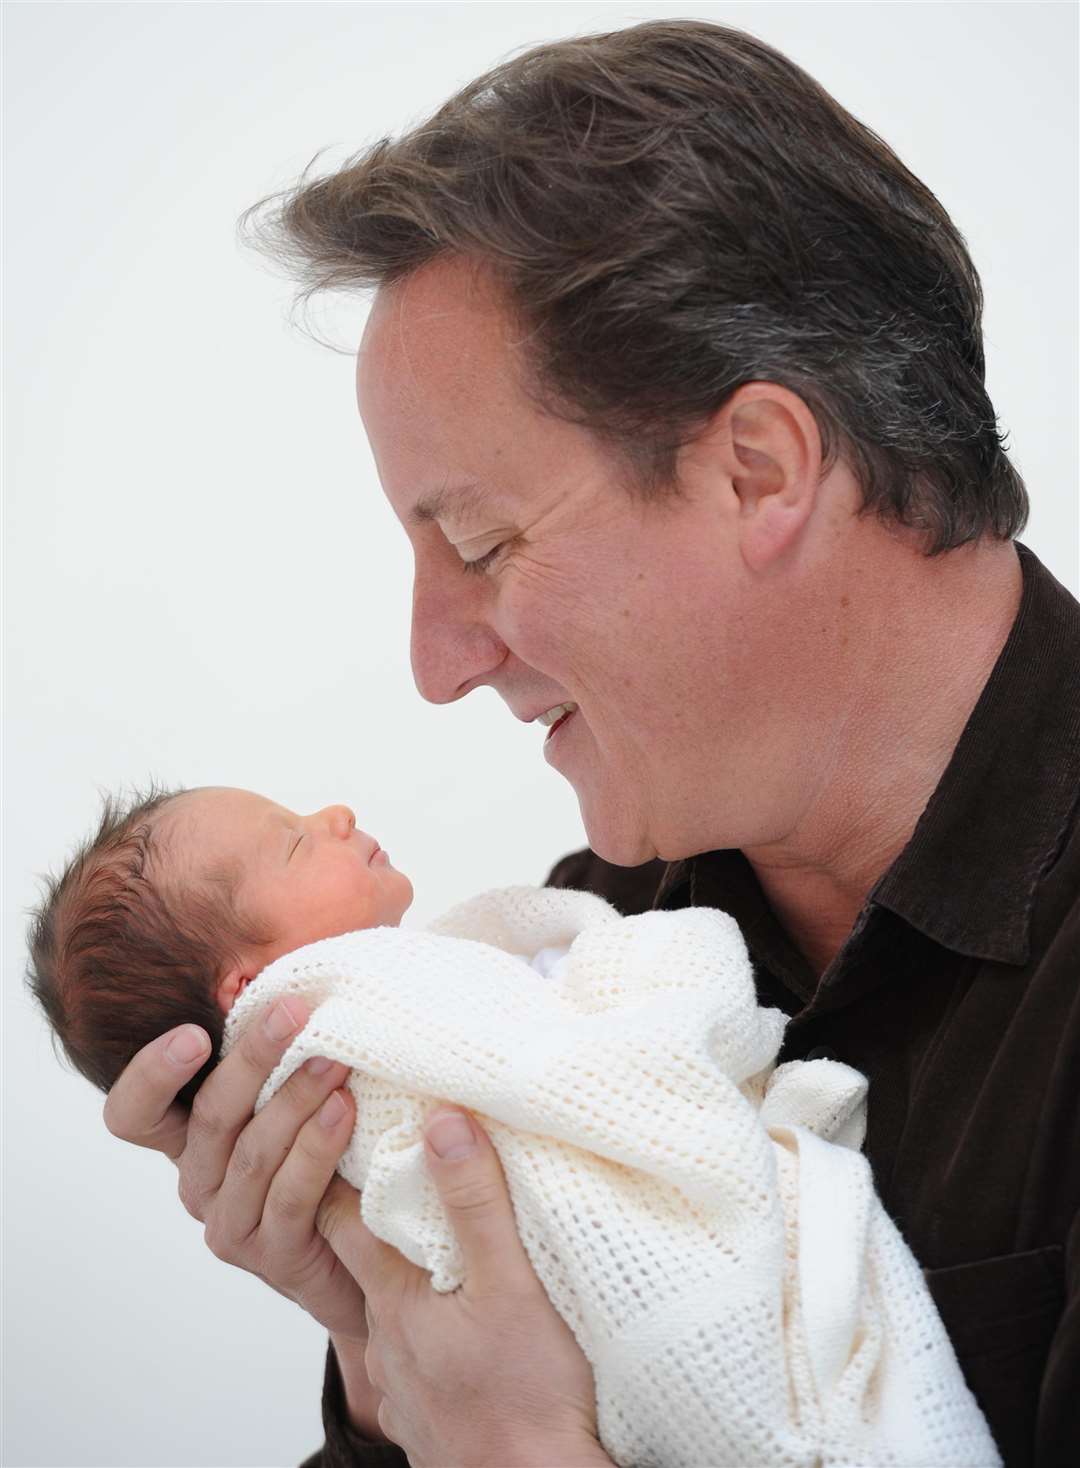 Former prime minister David Cameron took paternity leave after the birth of his daughter Florence Rose Endellion Cameron (Stefan Rousseau/PA)